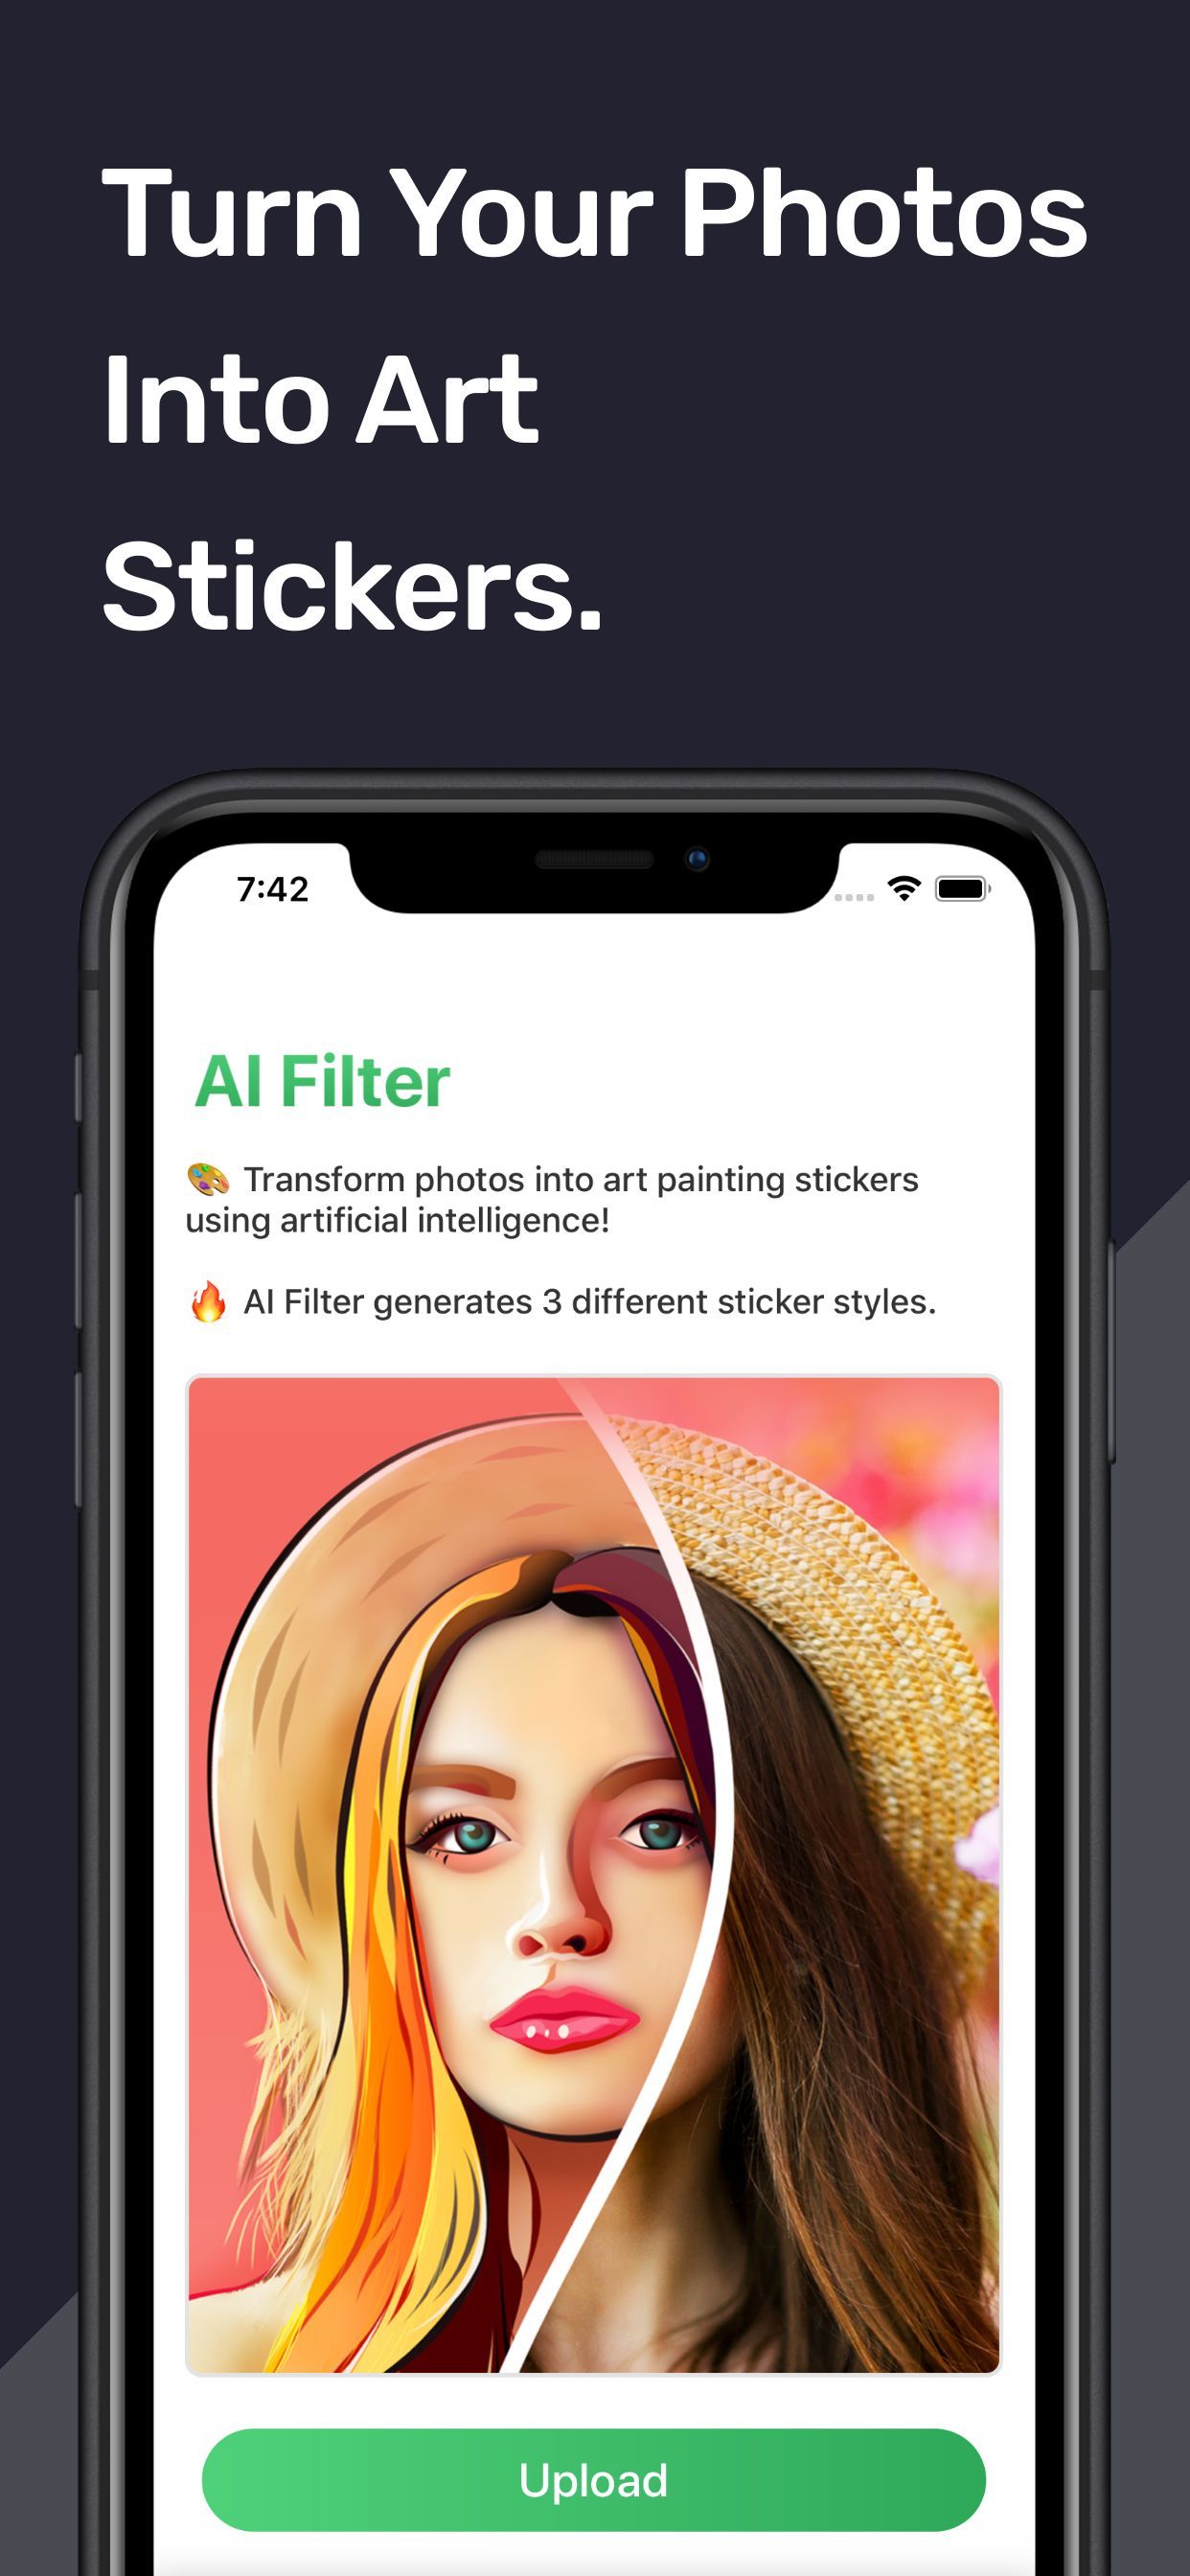 iPhone XS Max Screenshot 23 template. Quickly edit fonts, text, colors, and more for free.